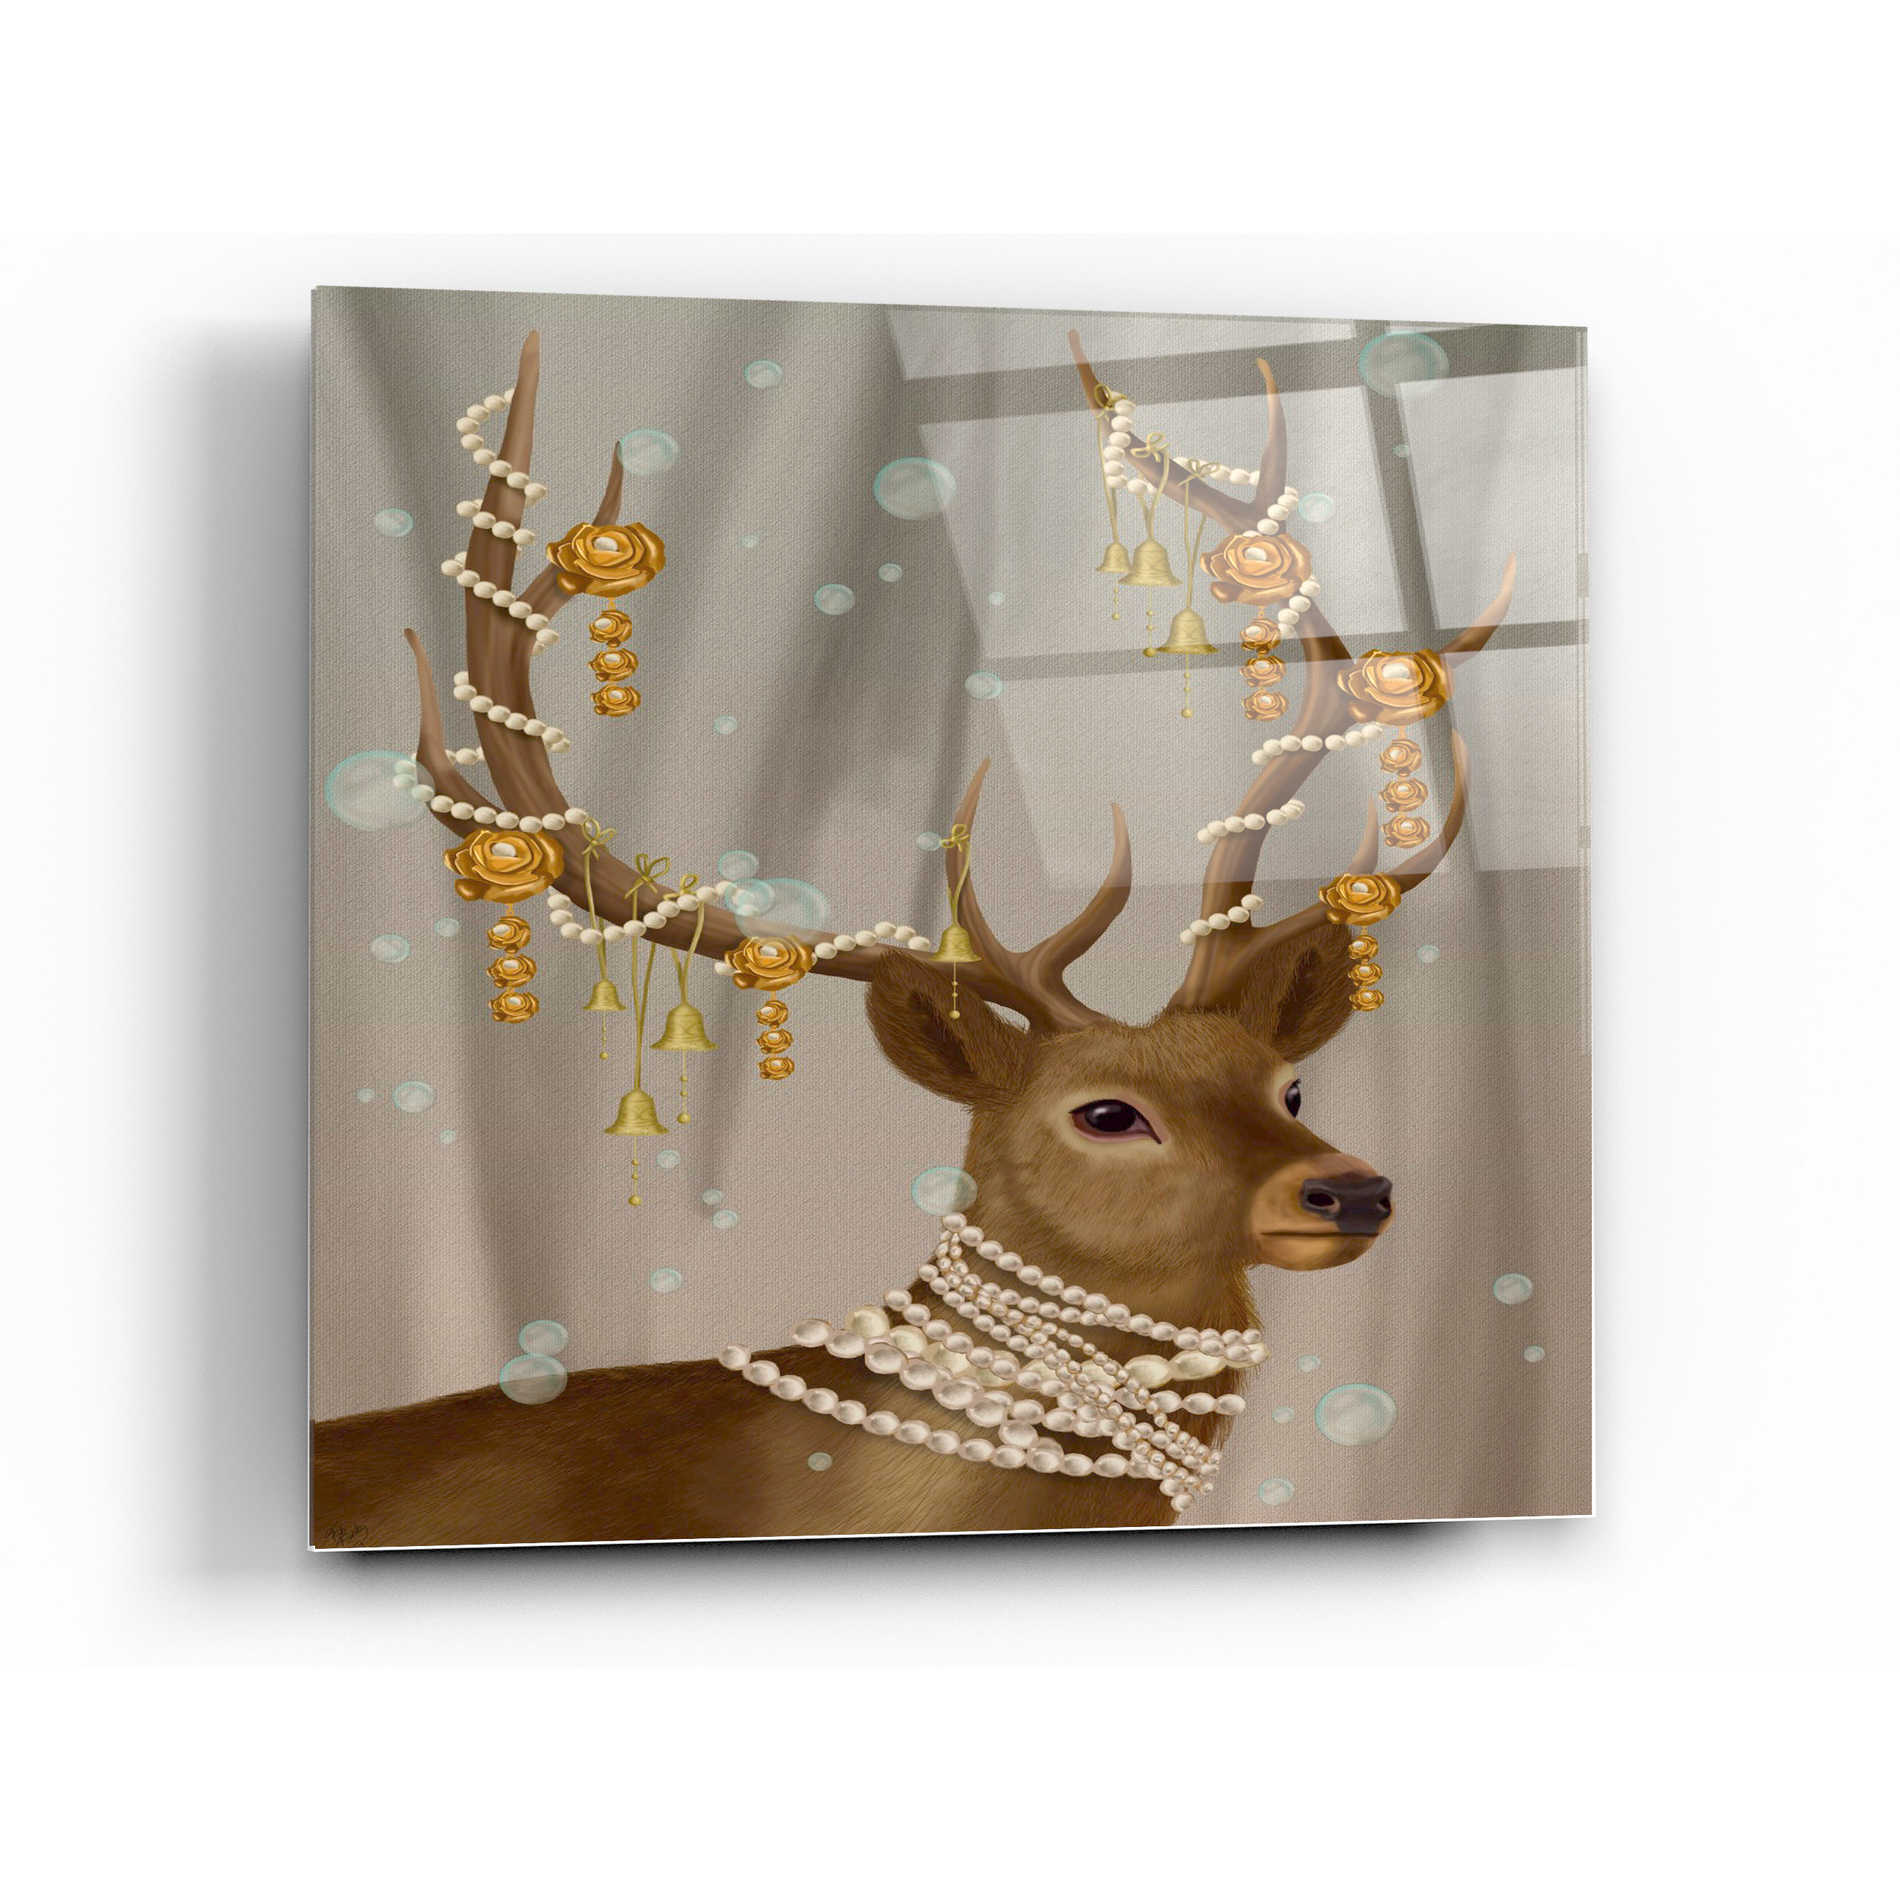 Epic Art 'Deer with Gold Bells' by Fab Funky Acrylic Glass Wall Art,12x12